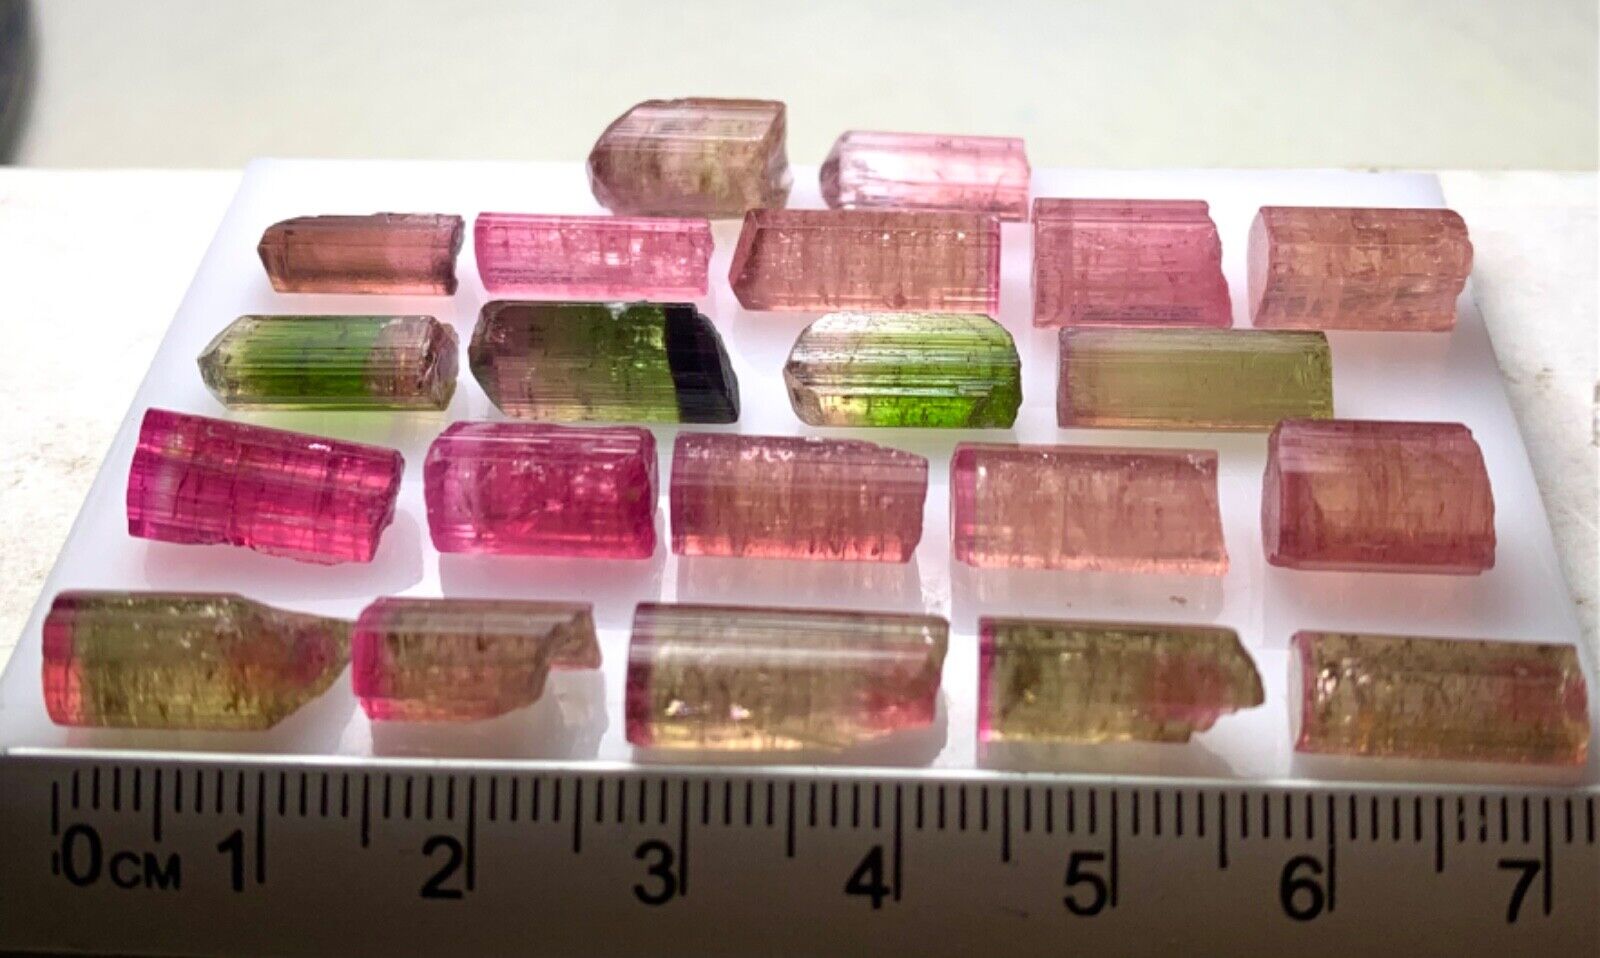 109.35 Ct Bi Colour Well Terminated Tourmaline Crystals From Afghanistan